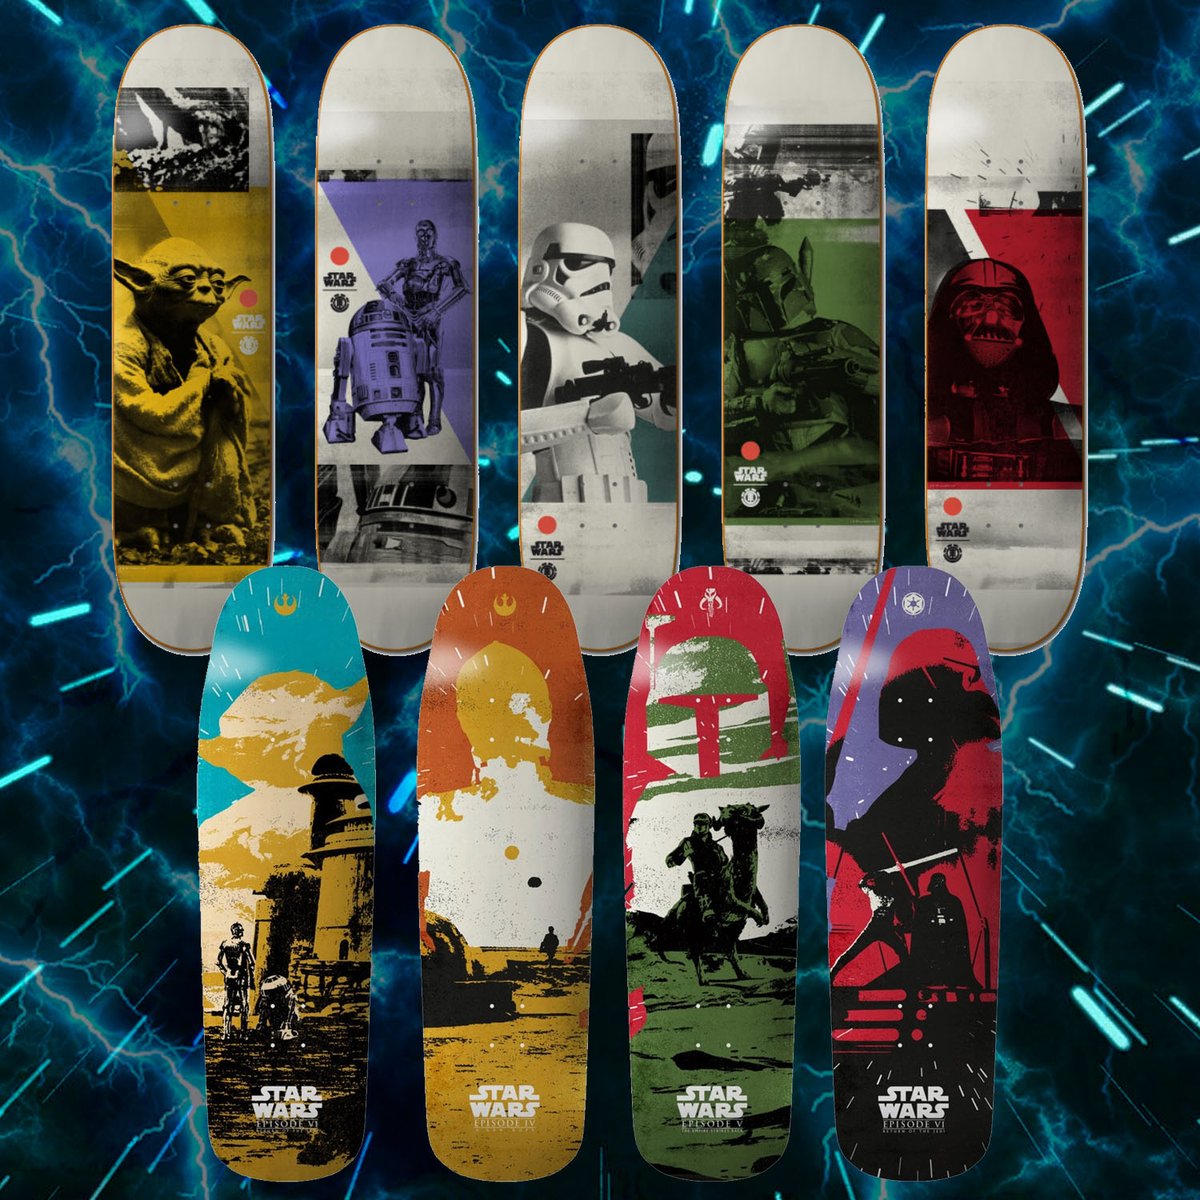 TGM Skateboards on "Brand new Element x Star Wars Limited Edition decks are in stock NOW! 5 popsicle boards &amp; 4 Old School https://t.co/9qyUKa4Yeq https://t.co/Dwxd73wwWF" / Twitter